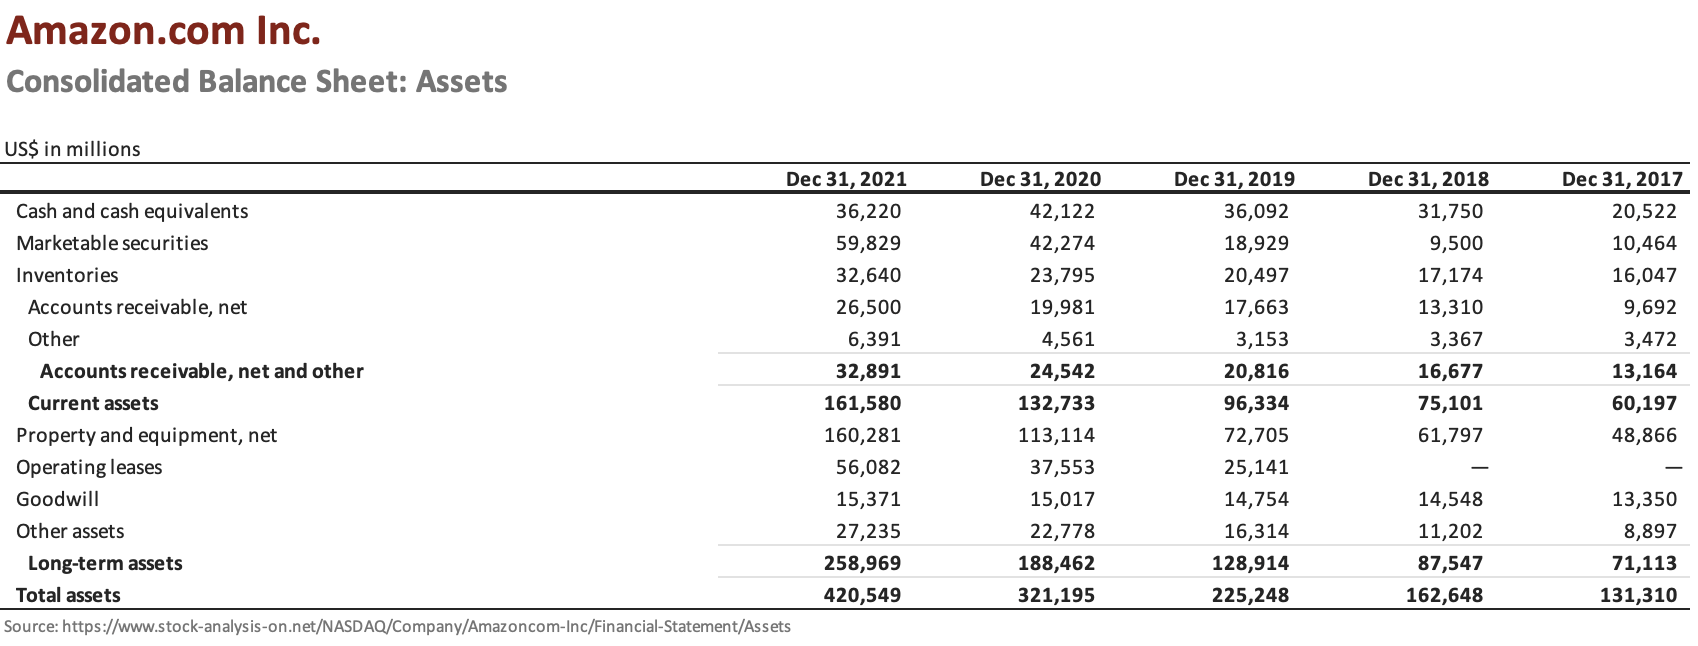 Amazon's balance sheet shows an increase in cash and other liquid assets from 2017 to 2021.